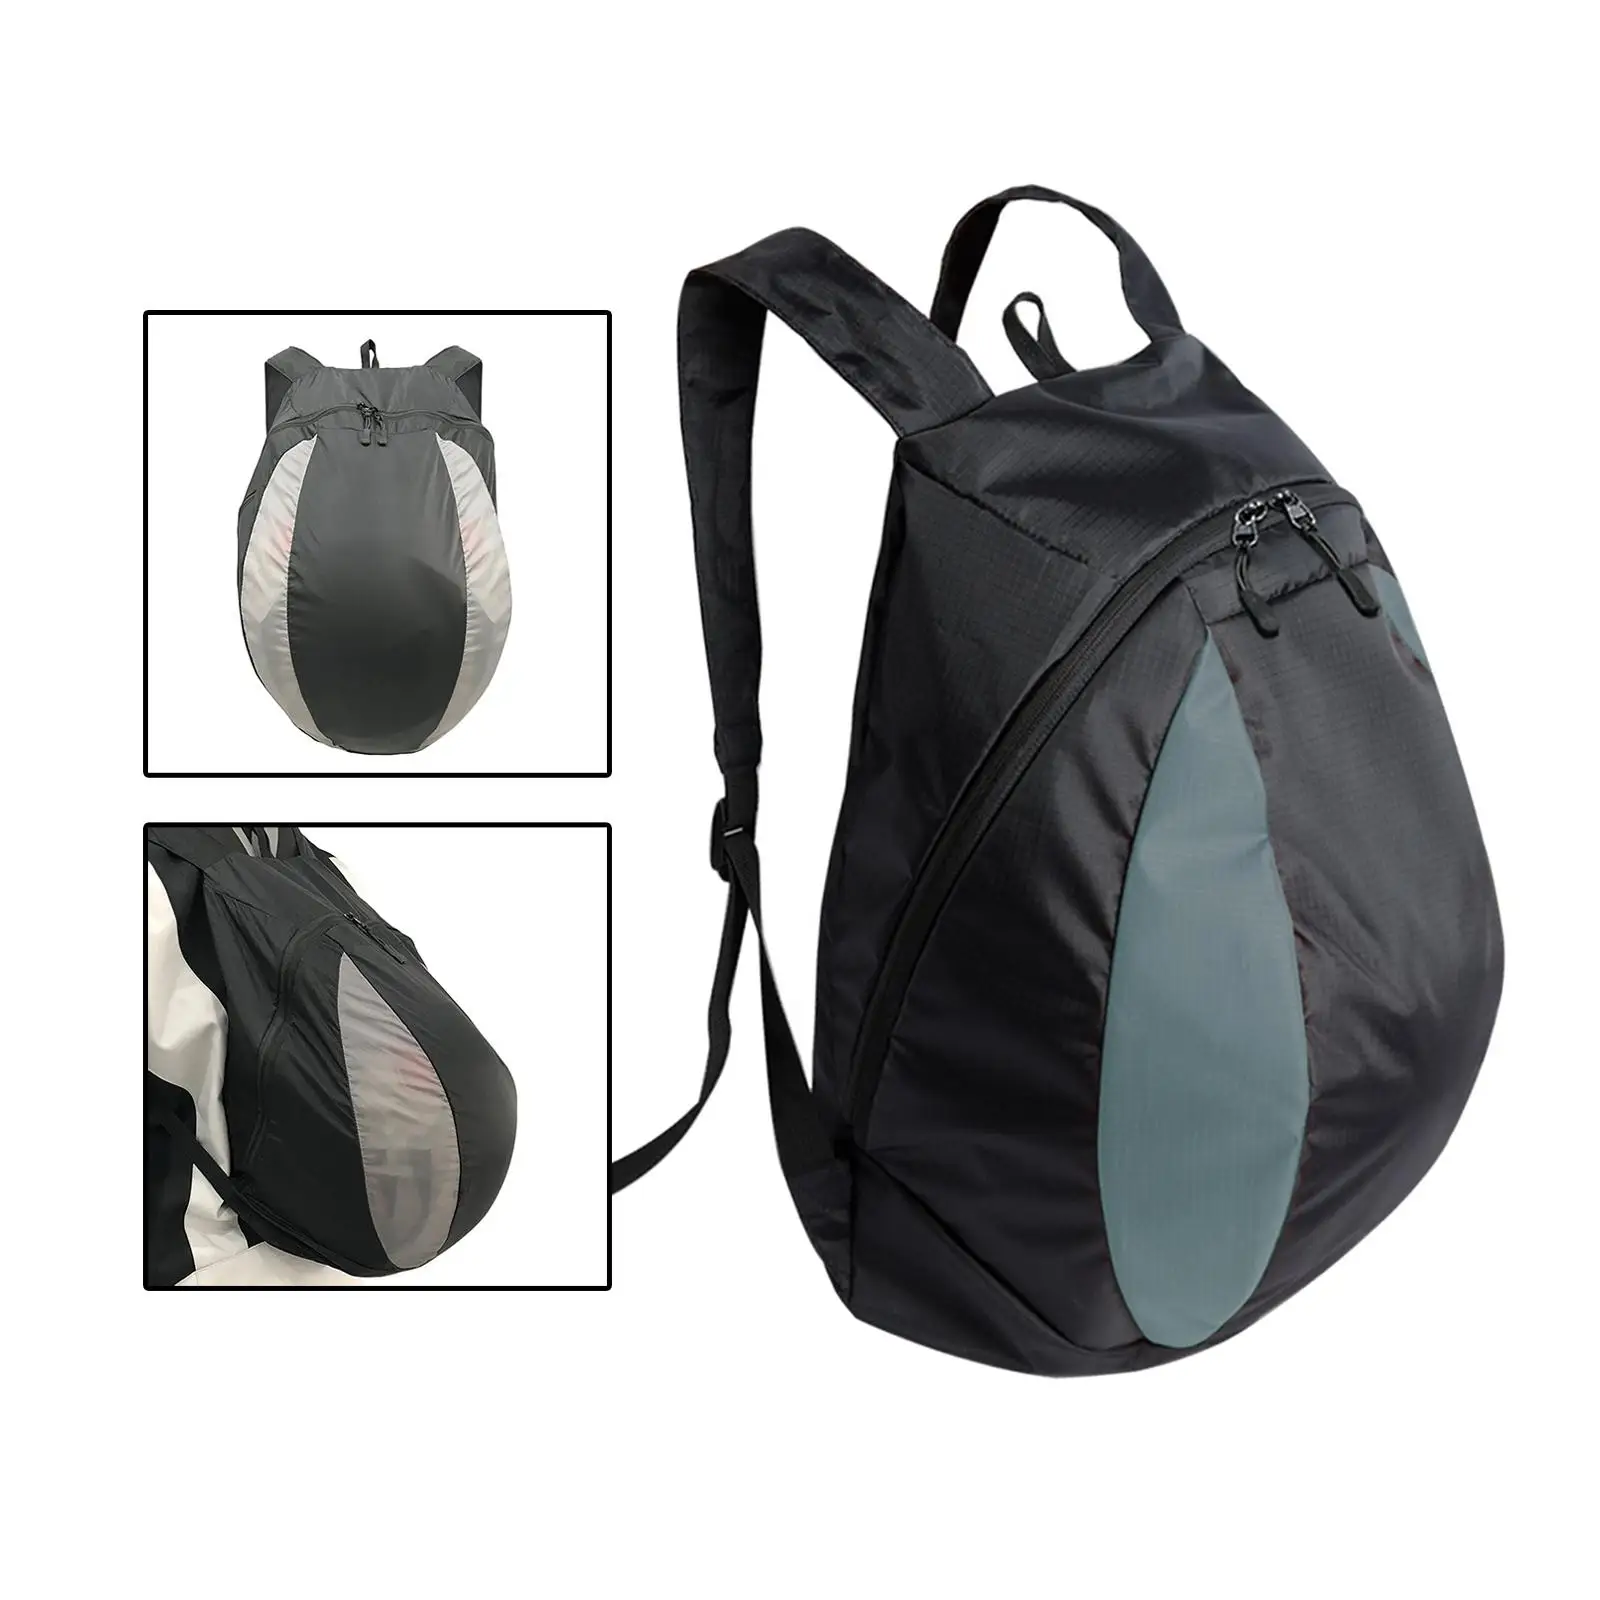 Basketball Shoulder Bag Wear Resistant Accessories Football Bag Motorcycle Backpack Bag for Study Sports Clothes Boys Girls